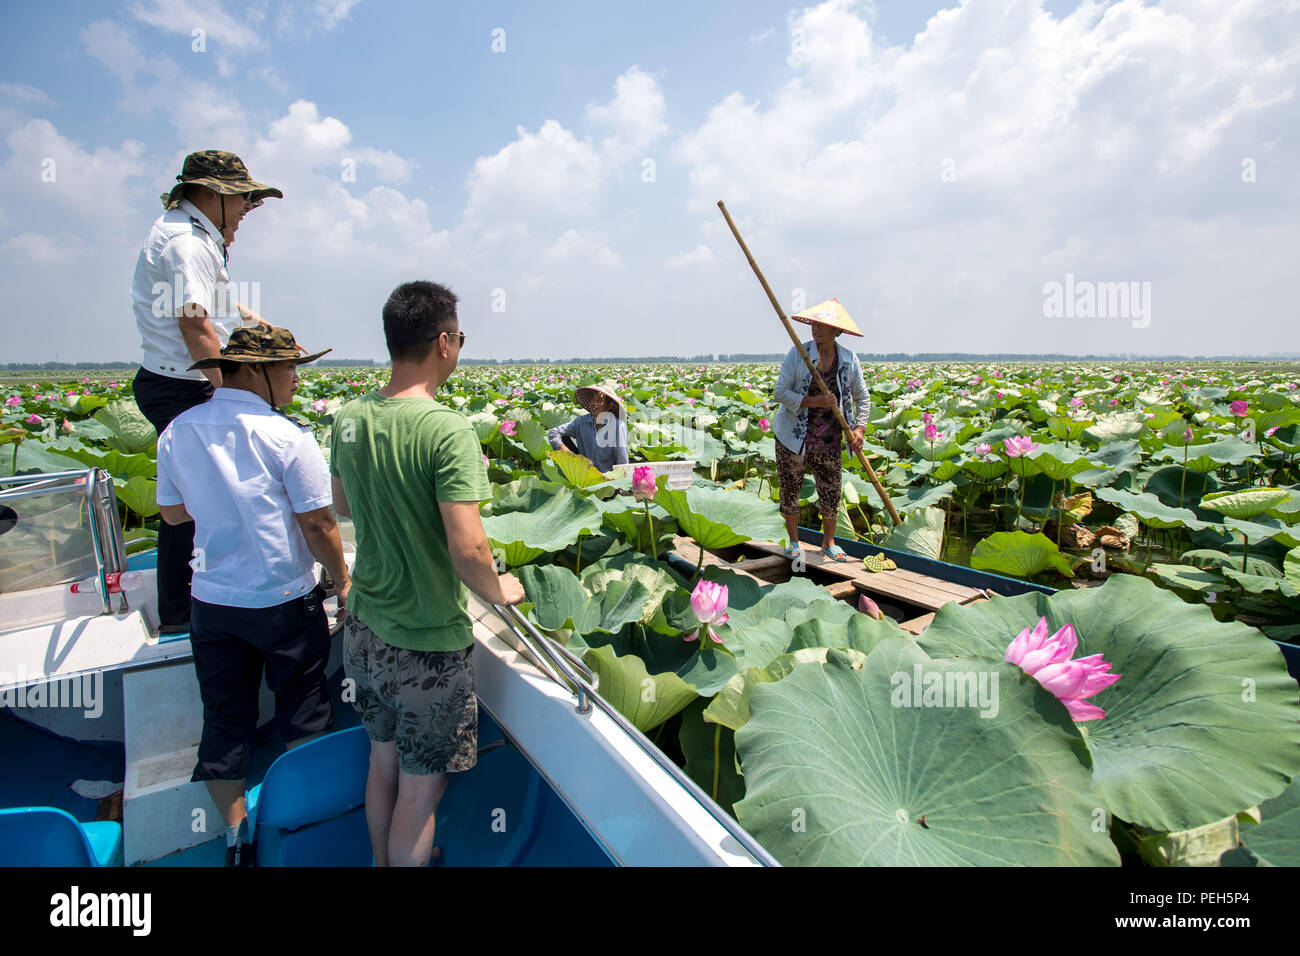 (180815) -- HONGHU, Aug. 15, 2018 (Xinhua) -- Staff members of the Xiaogang lake-patroller station patrol the Honghu Lake in Honghu City, central China's Hubei Province, Aug. 15, 2018.      Honghu Lake, Hubei Province's biggest lake, is 'a place better than paradise' with abundant fish, rice, lotus and ducks, says a popular Chinese folk song.     This was true until overfishing ruined the 41,000-hectare wetland. To revive Honghu, local government has taken a series of protective measures, such as getting rid of all the fences and nets used to trap fish, monitoring water quality and using treat Stock Photo